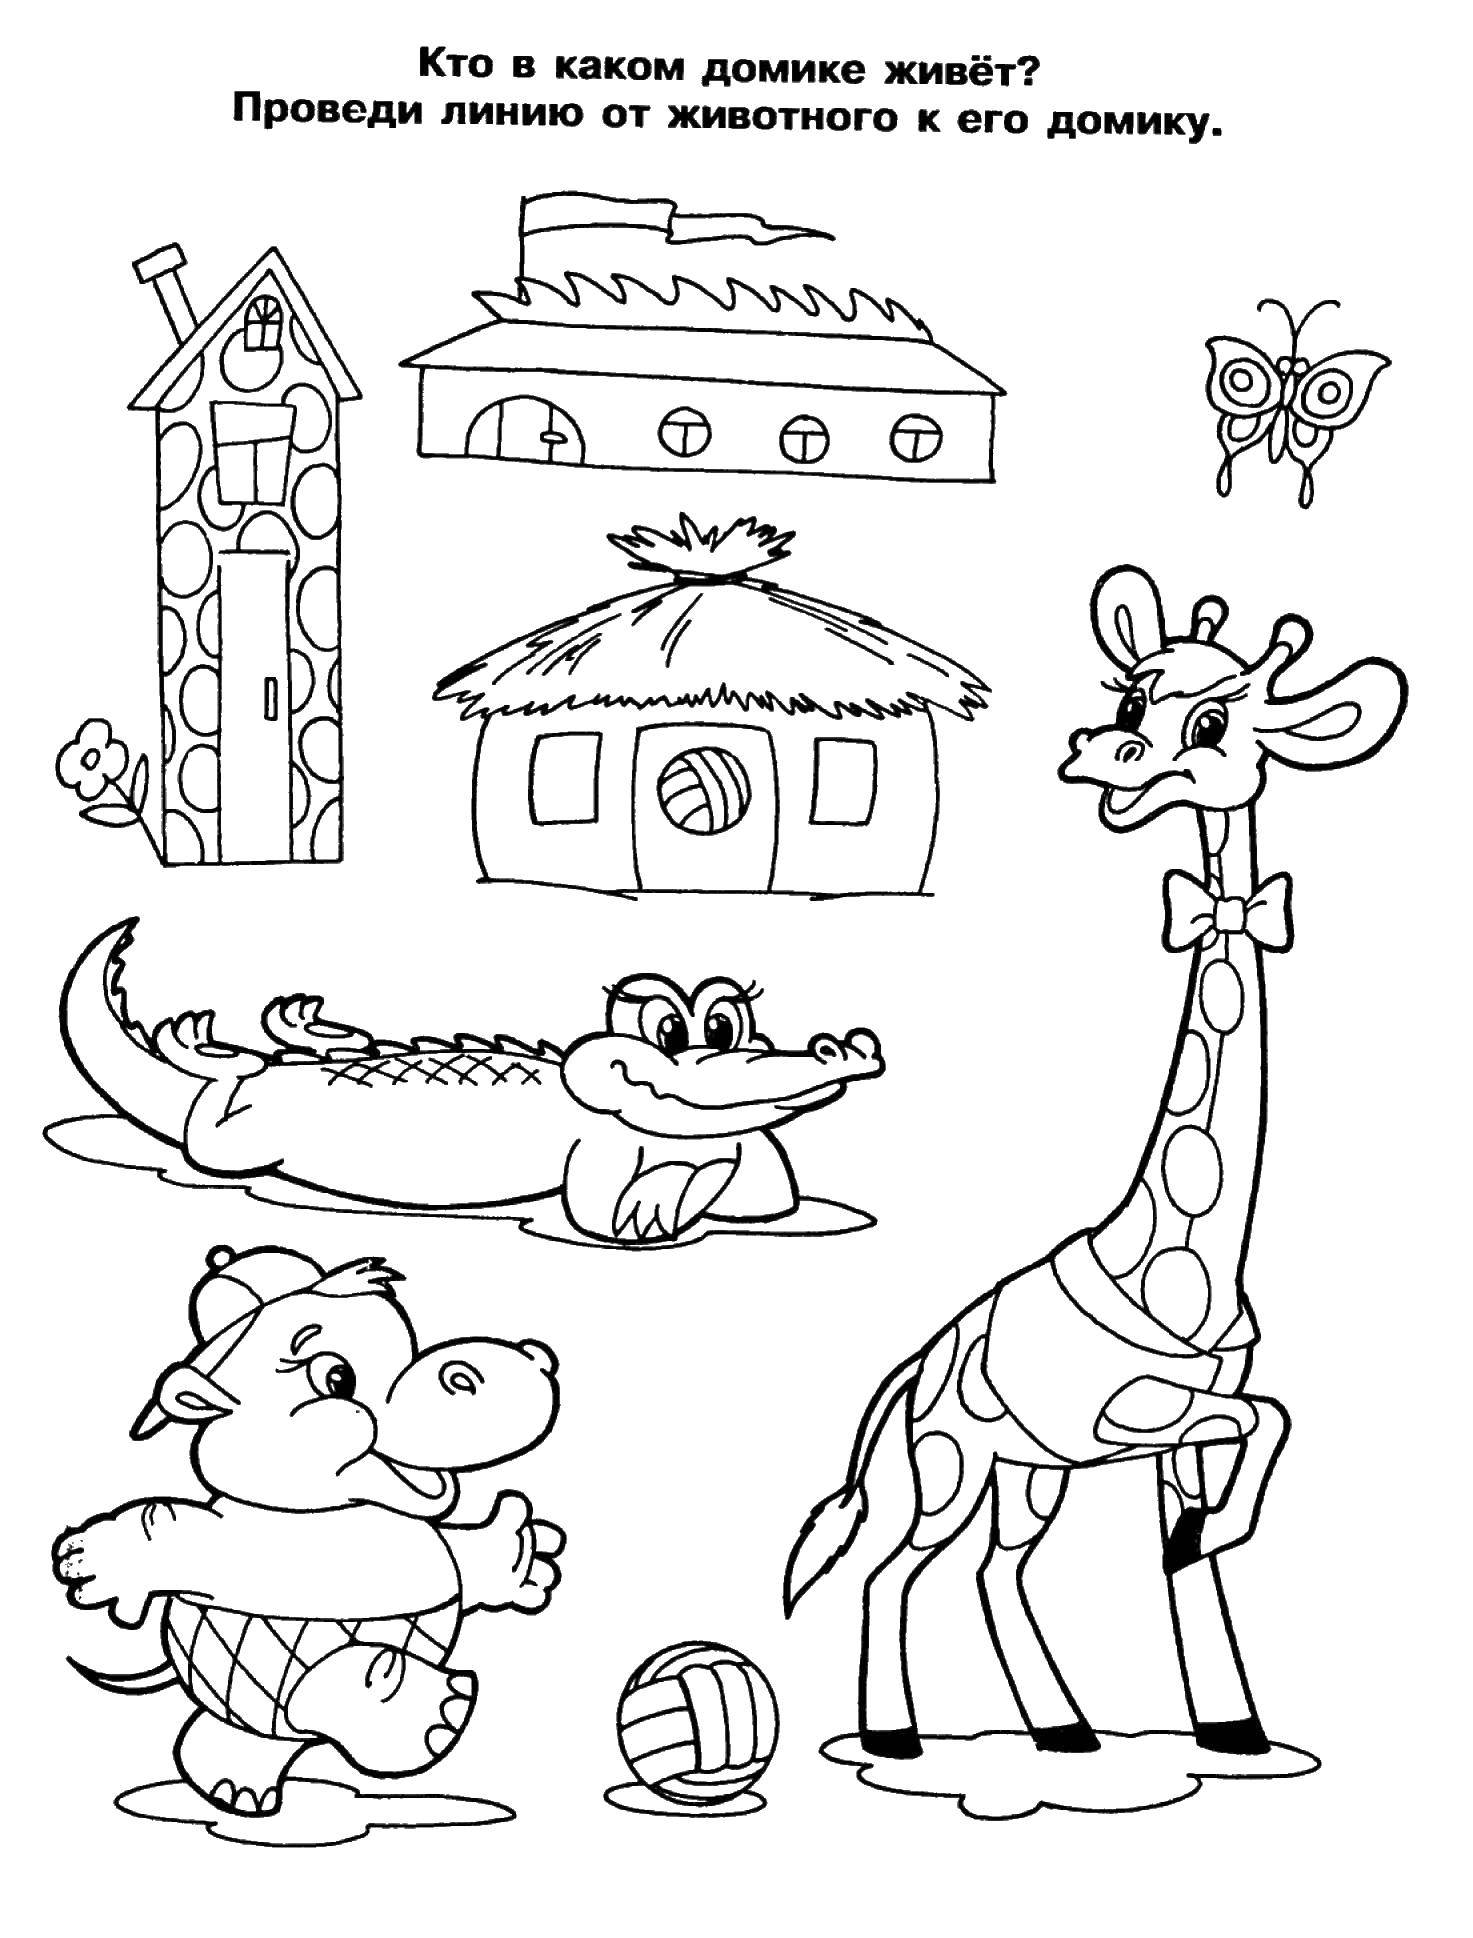 Coloring Zoo. Category zoo. Tags:  zoo, animals.